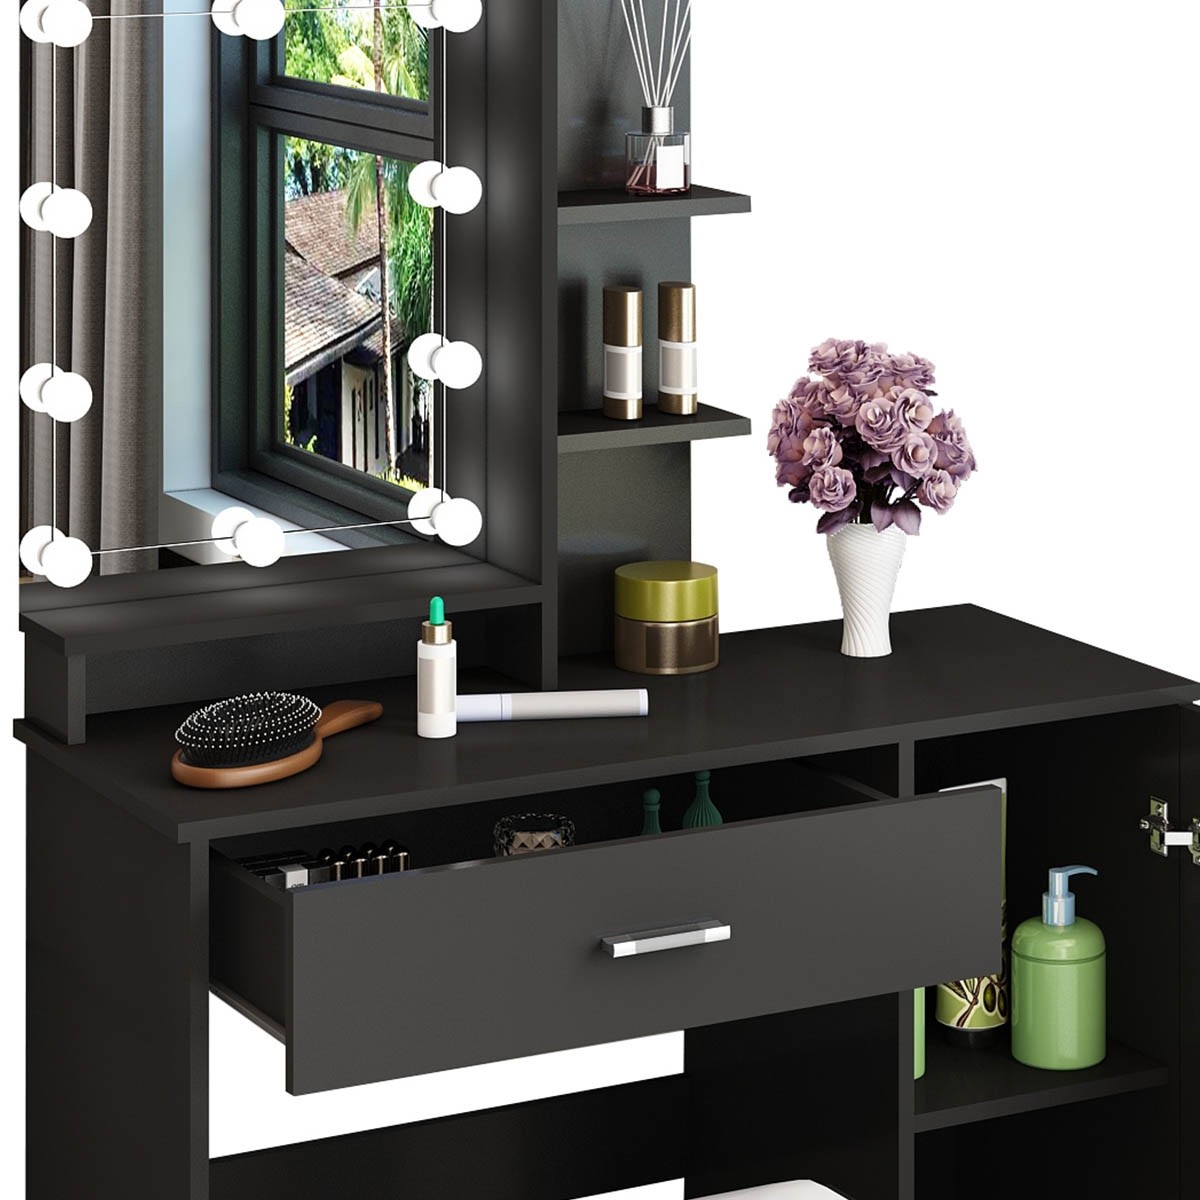 Black Makeup Vanity Table with Stool, Mirror & LED Lights